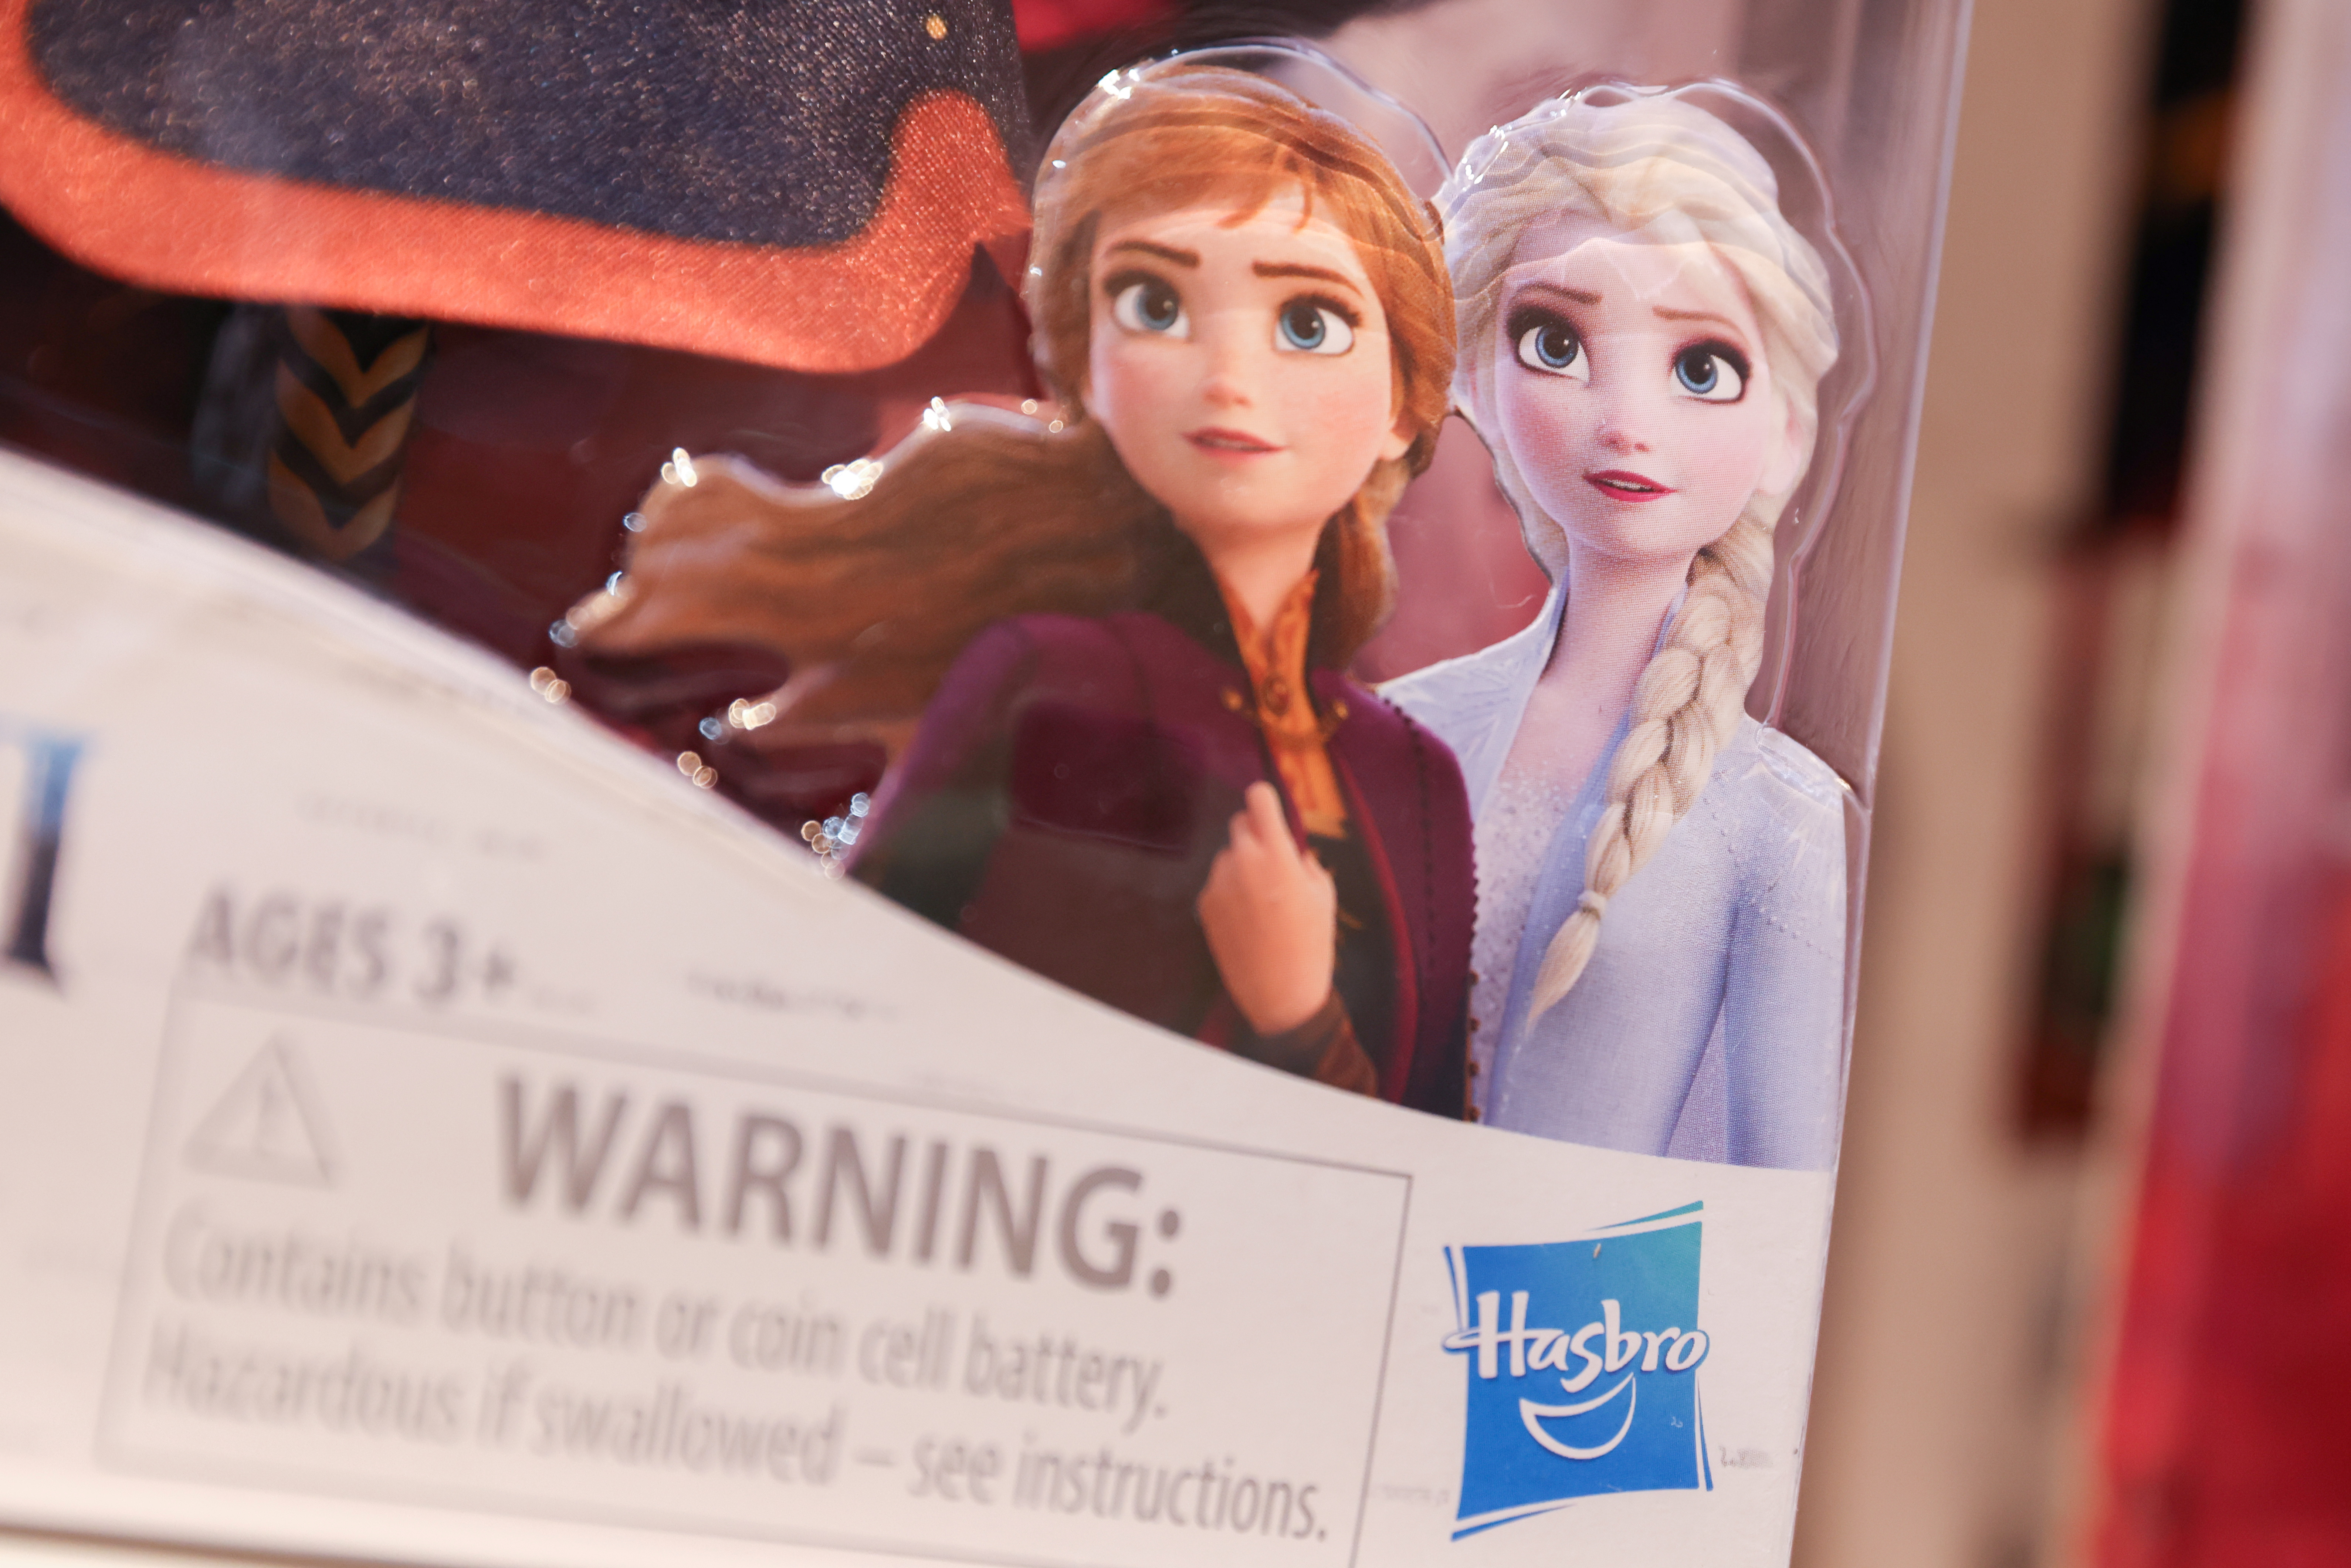 The Hasbro, Inc. logo is seen on Frozen 2 toys for sale in a store in Manhattan, New York